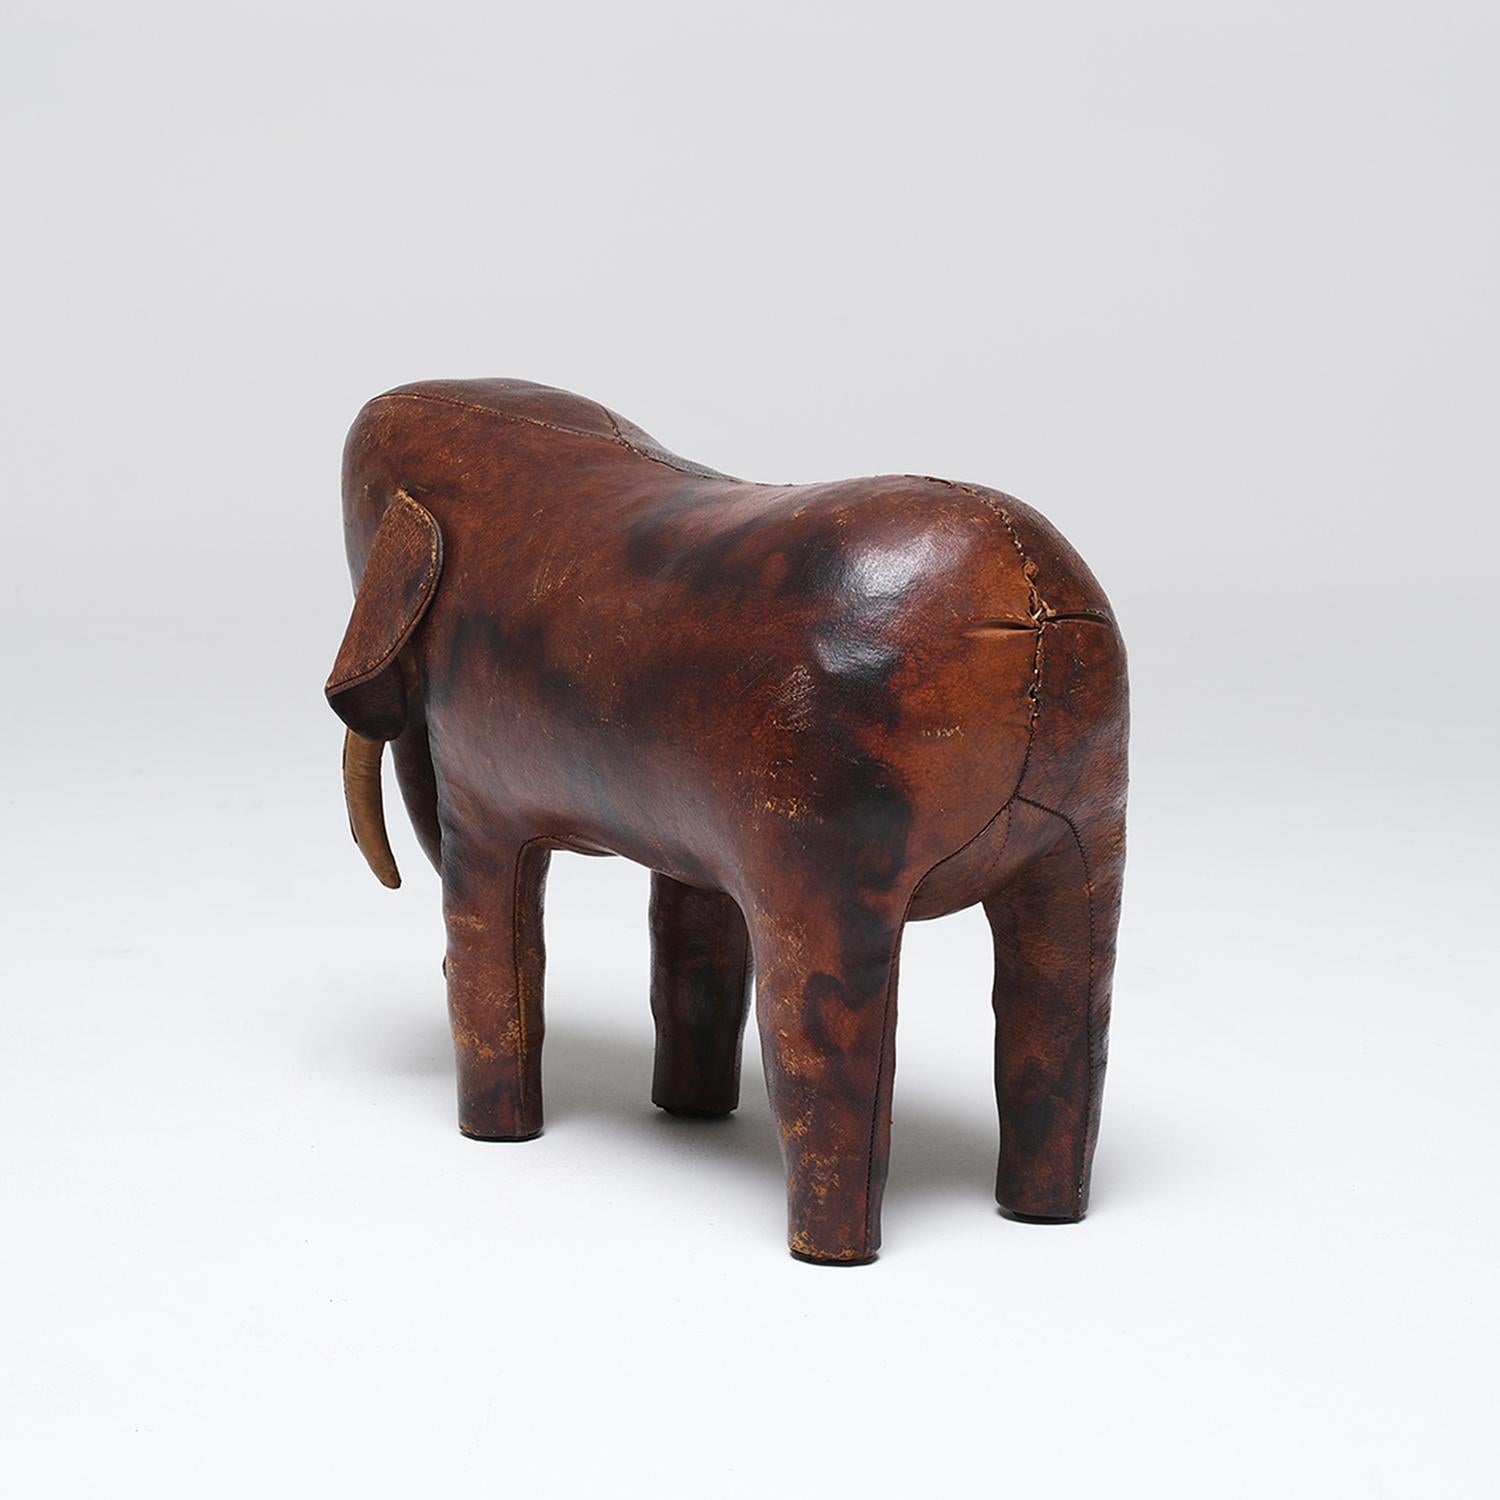 20th Century English Vintage Elephant Footstool by Dimitri Omersa For Sale 1